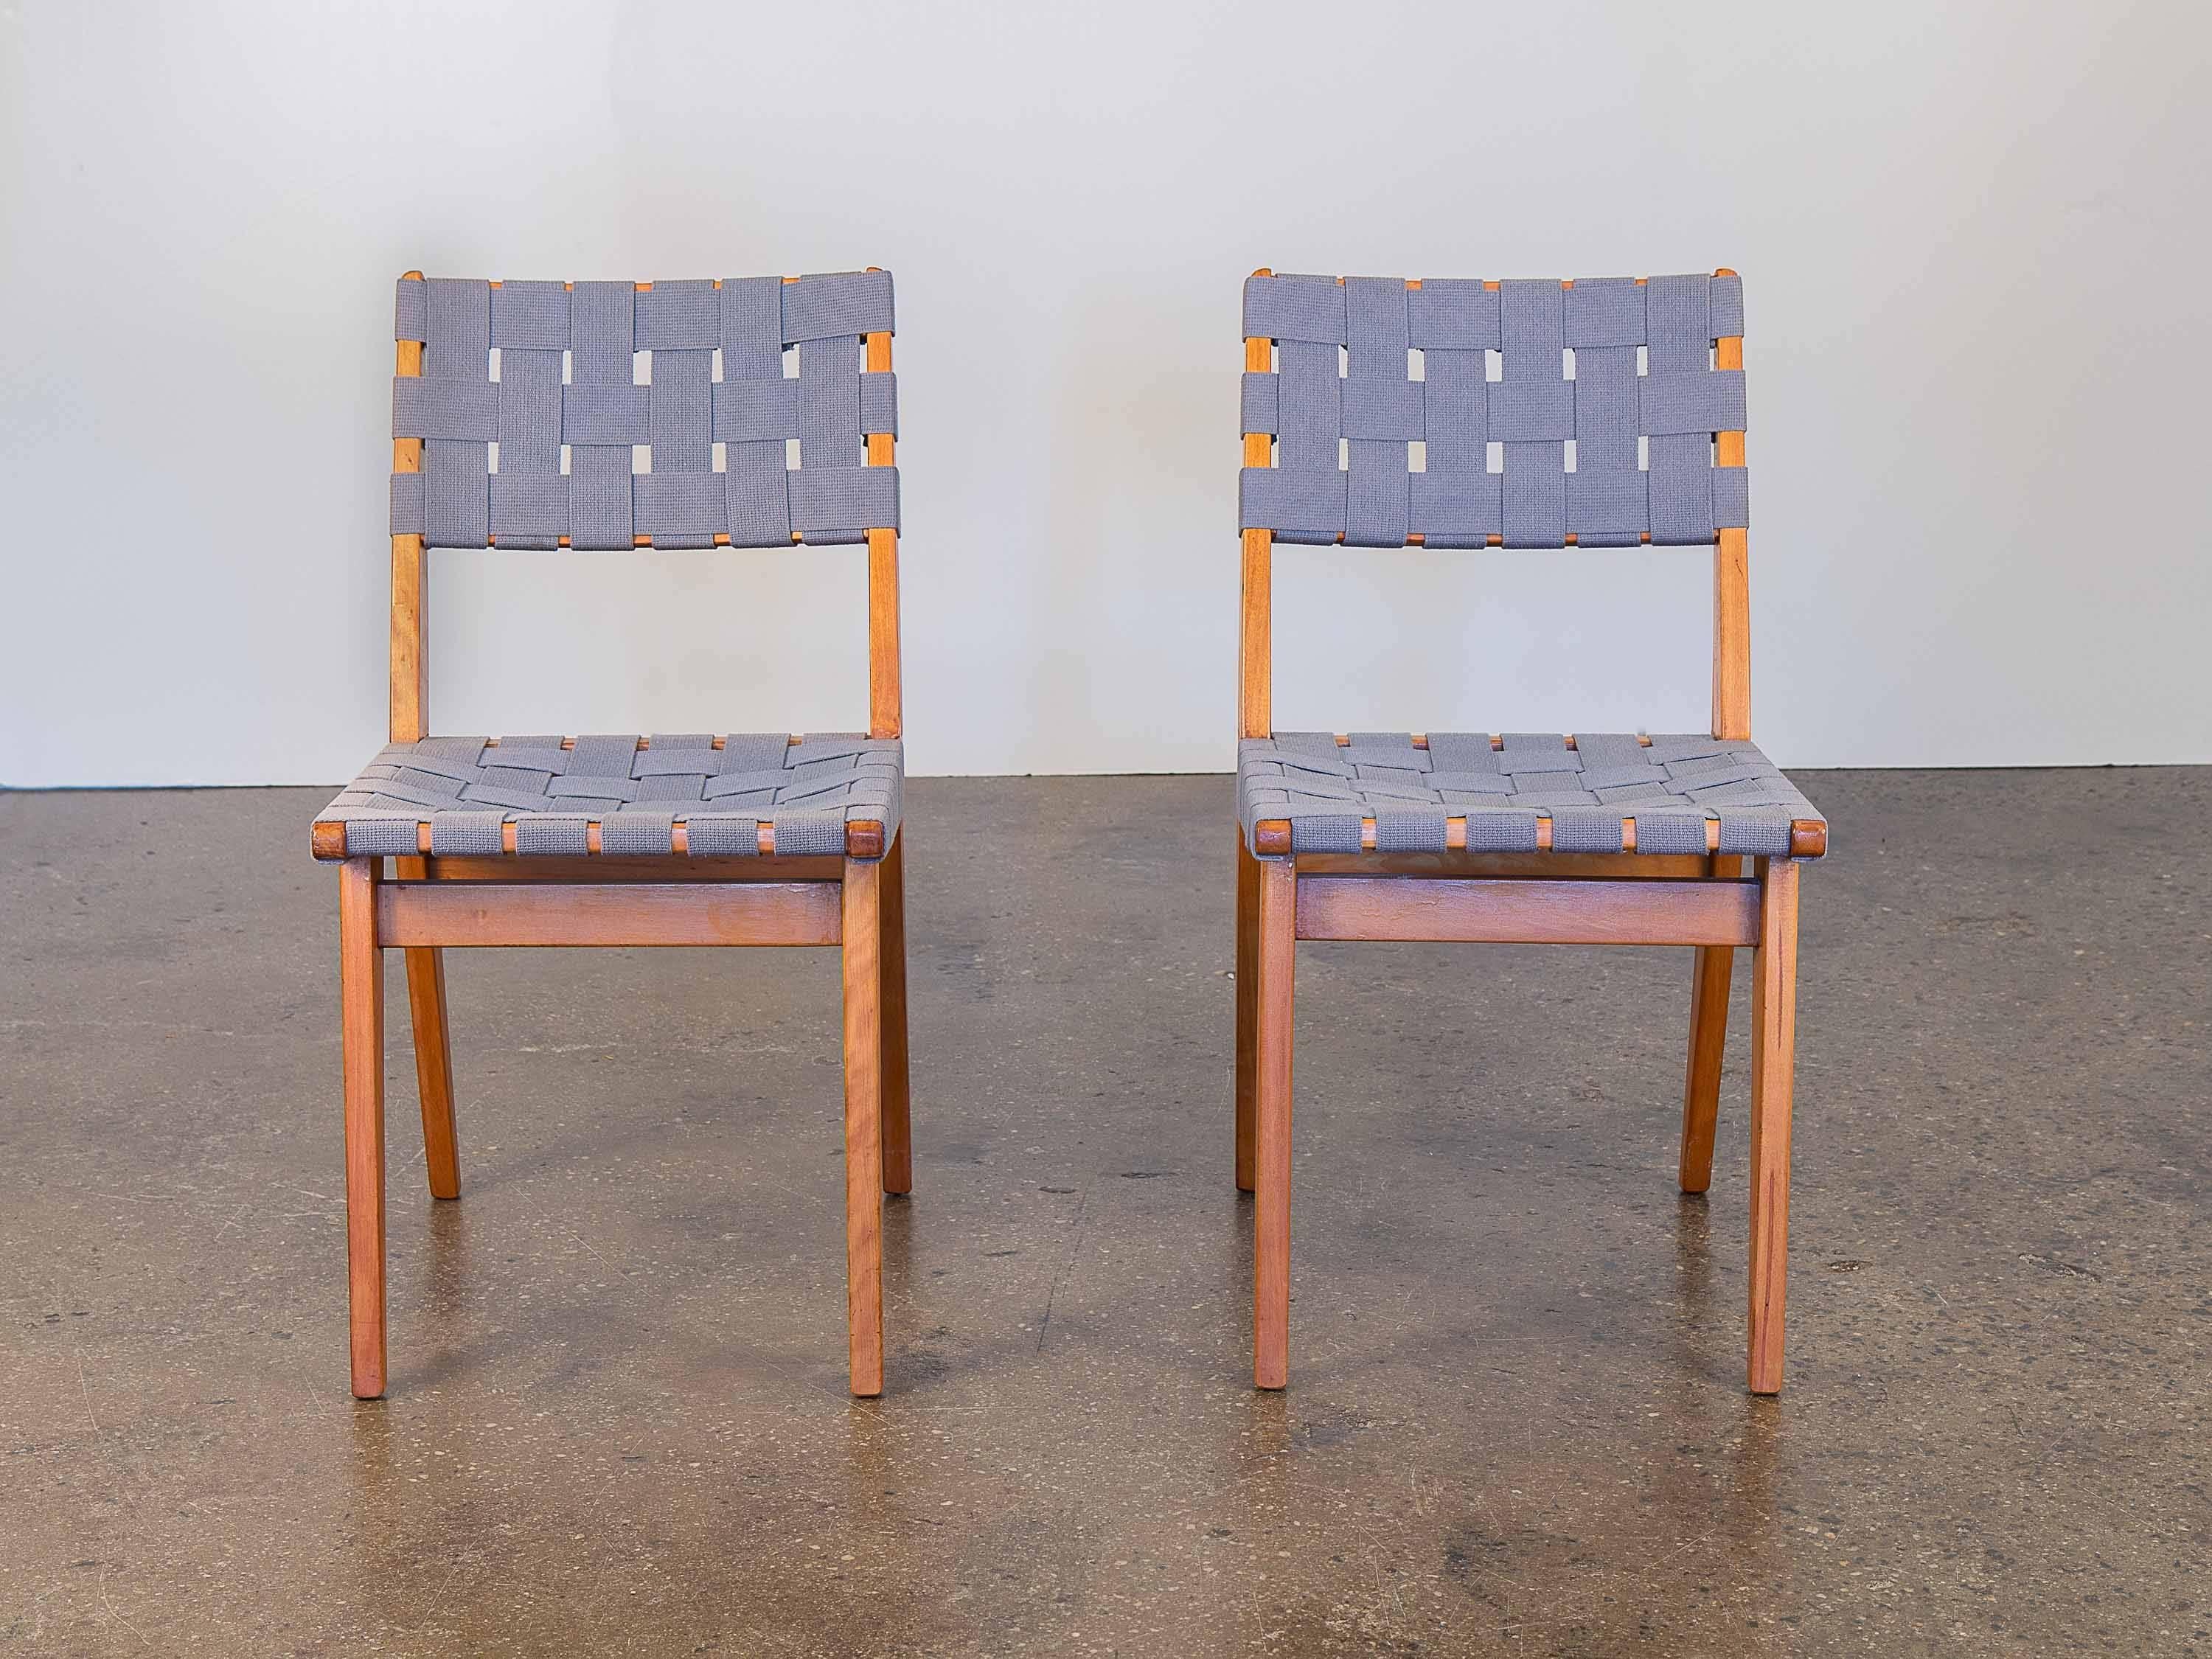 Jens Risom side chairs from 1941 for Knoll. Solid birch construction with rarely seen and blue woven webbing. An interesting example of early Scandinavian American design. As seen in the original 1950 Knoll associates catalogue. Chairs sold as a